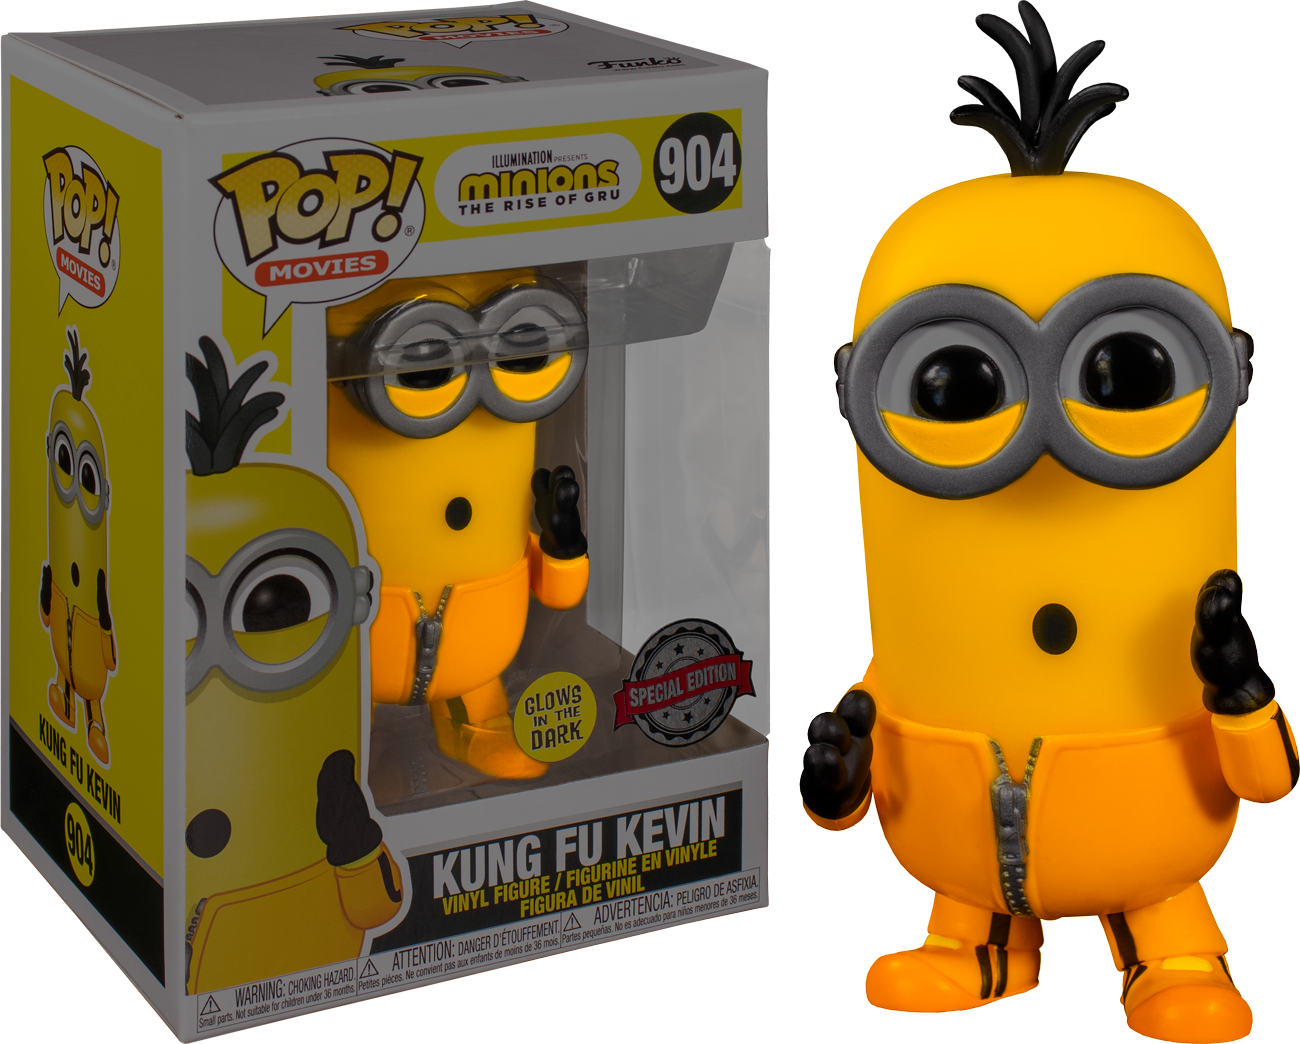 Pop Movies Minions 2 The Rise Of Gru Kung Fu Kevin Glow In The Sheldonet Toy Store